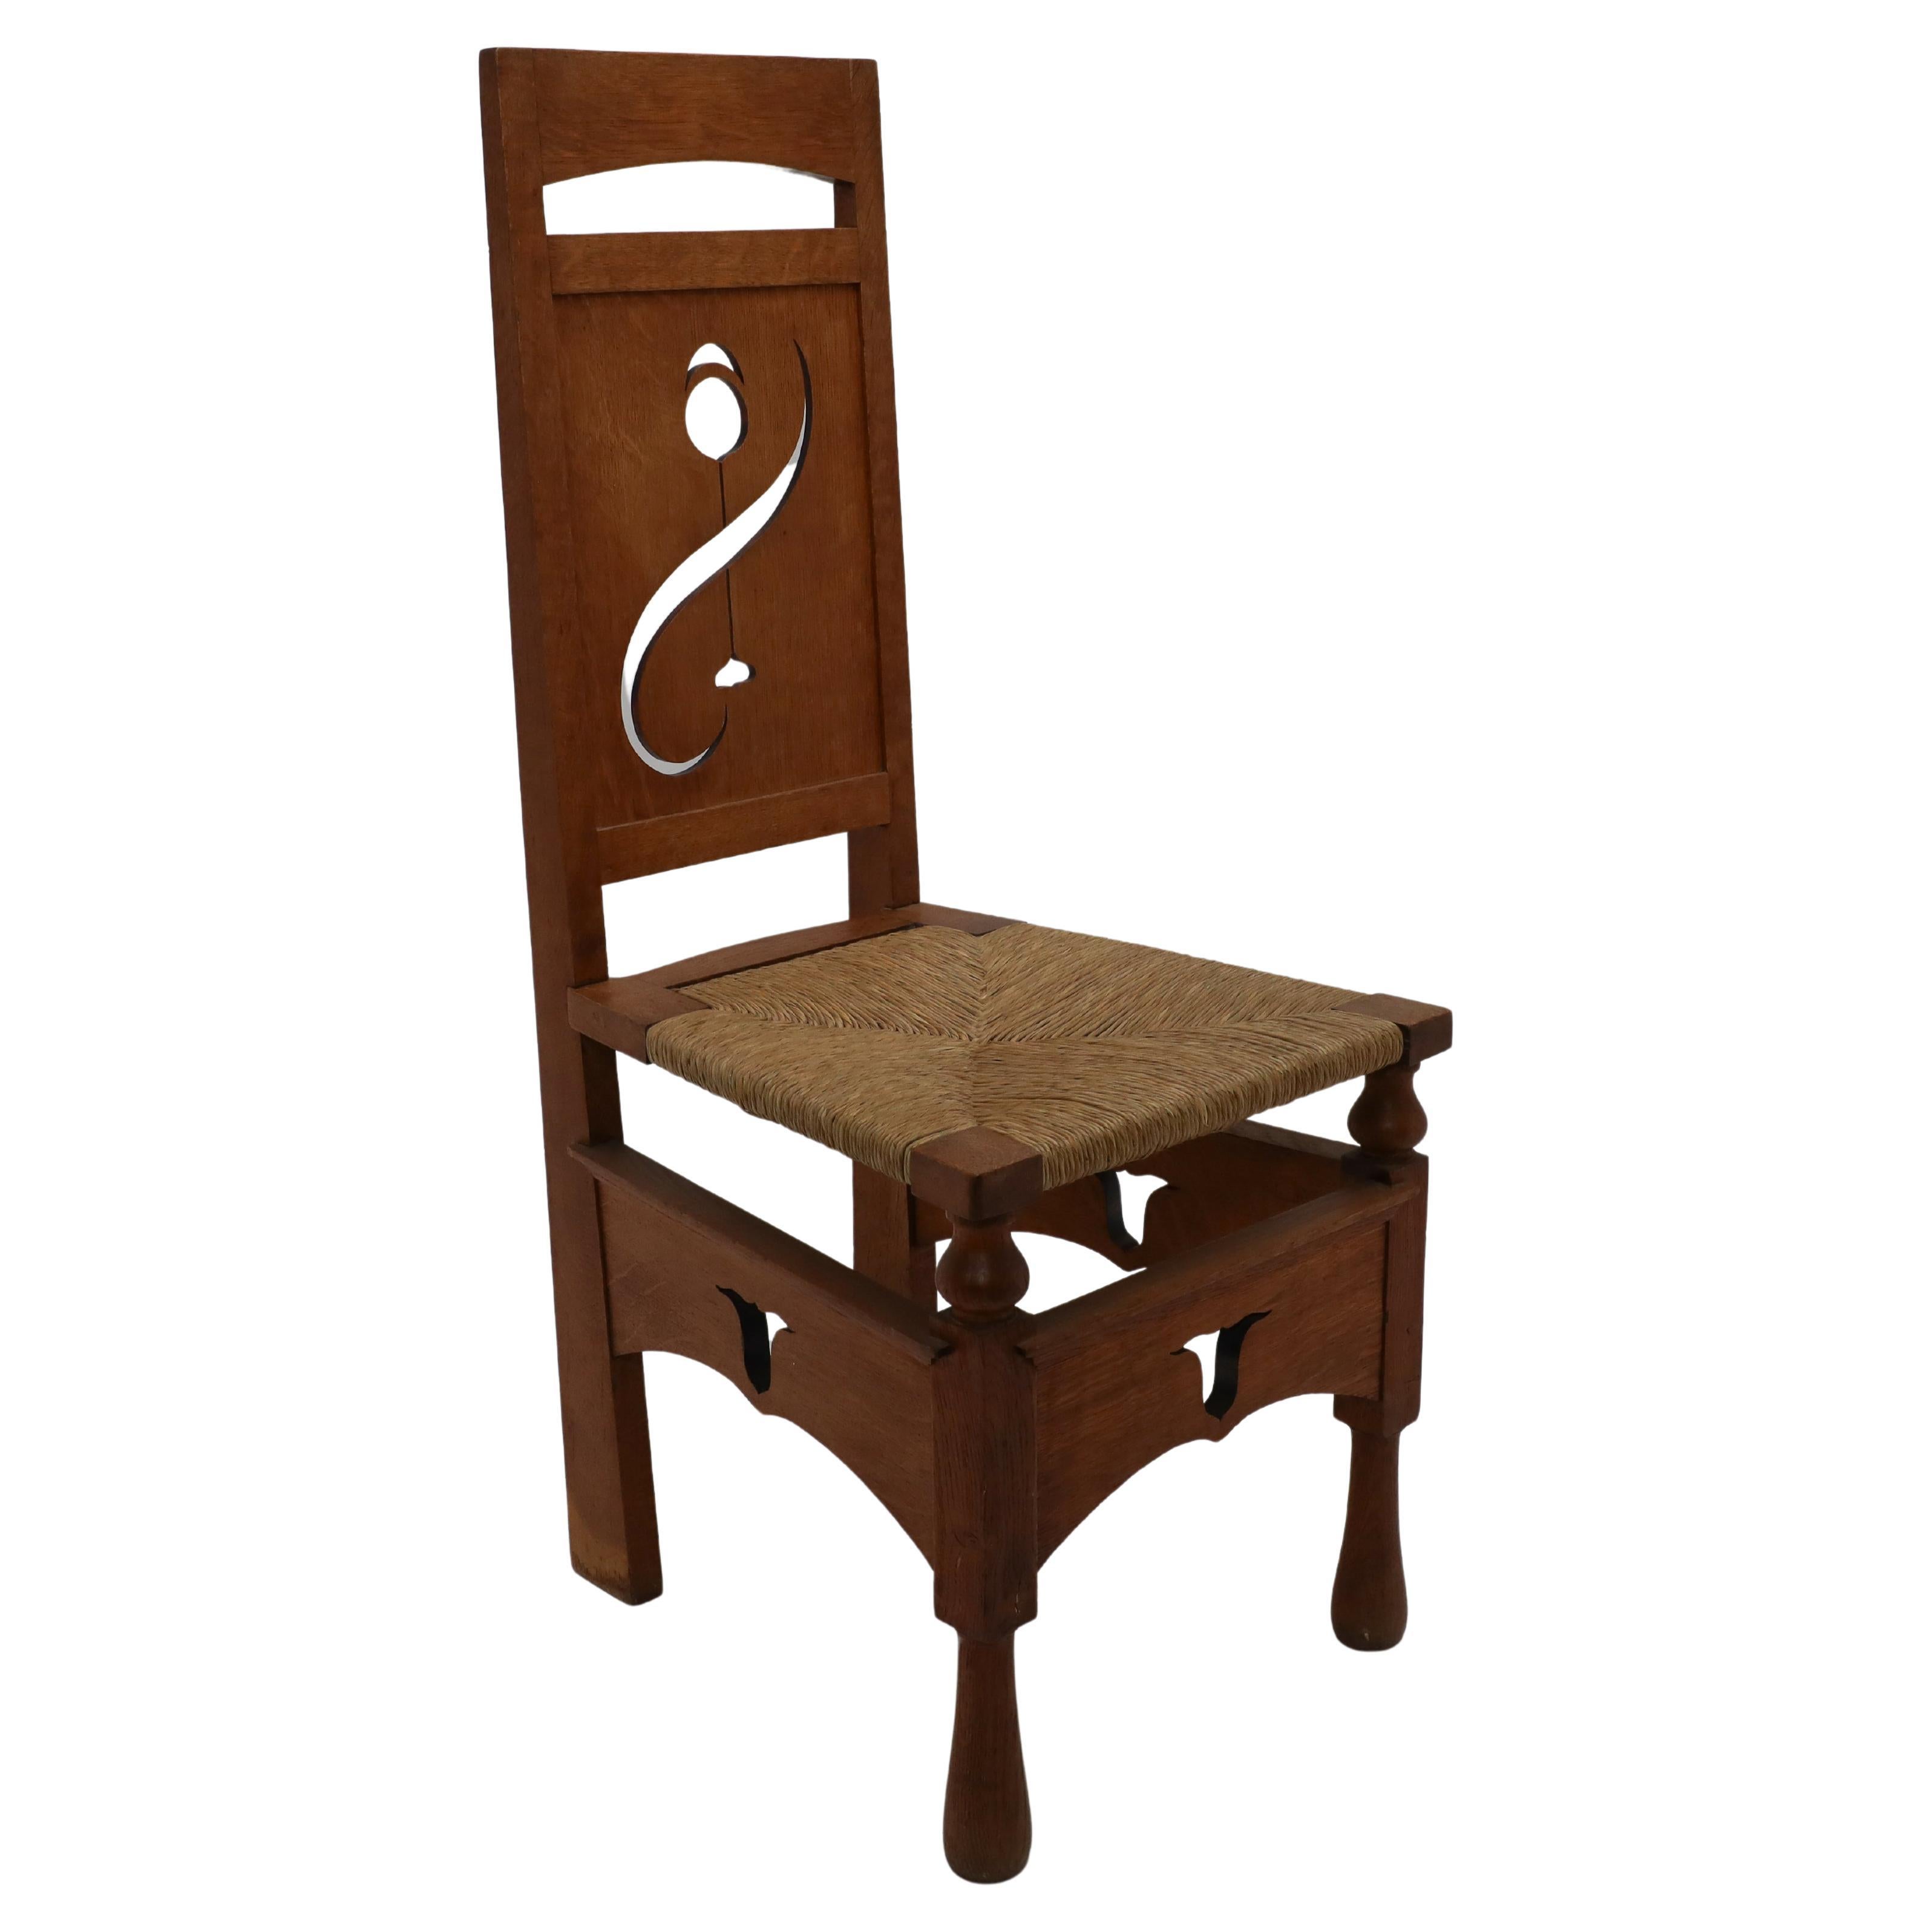 M H Baillie Scott attri An Arts & Crafts Oak Chair With Stylised Floral Cut-Outs